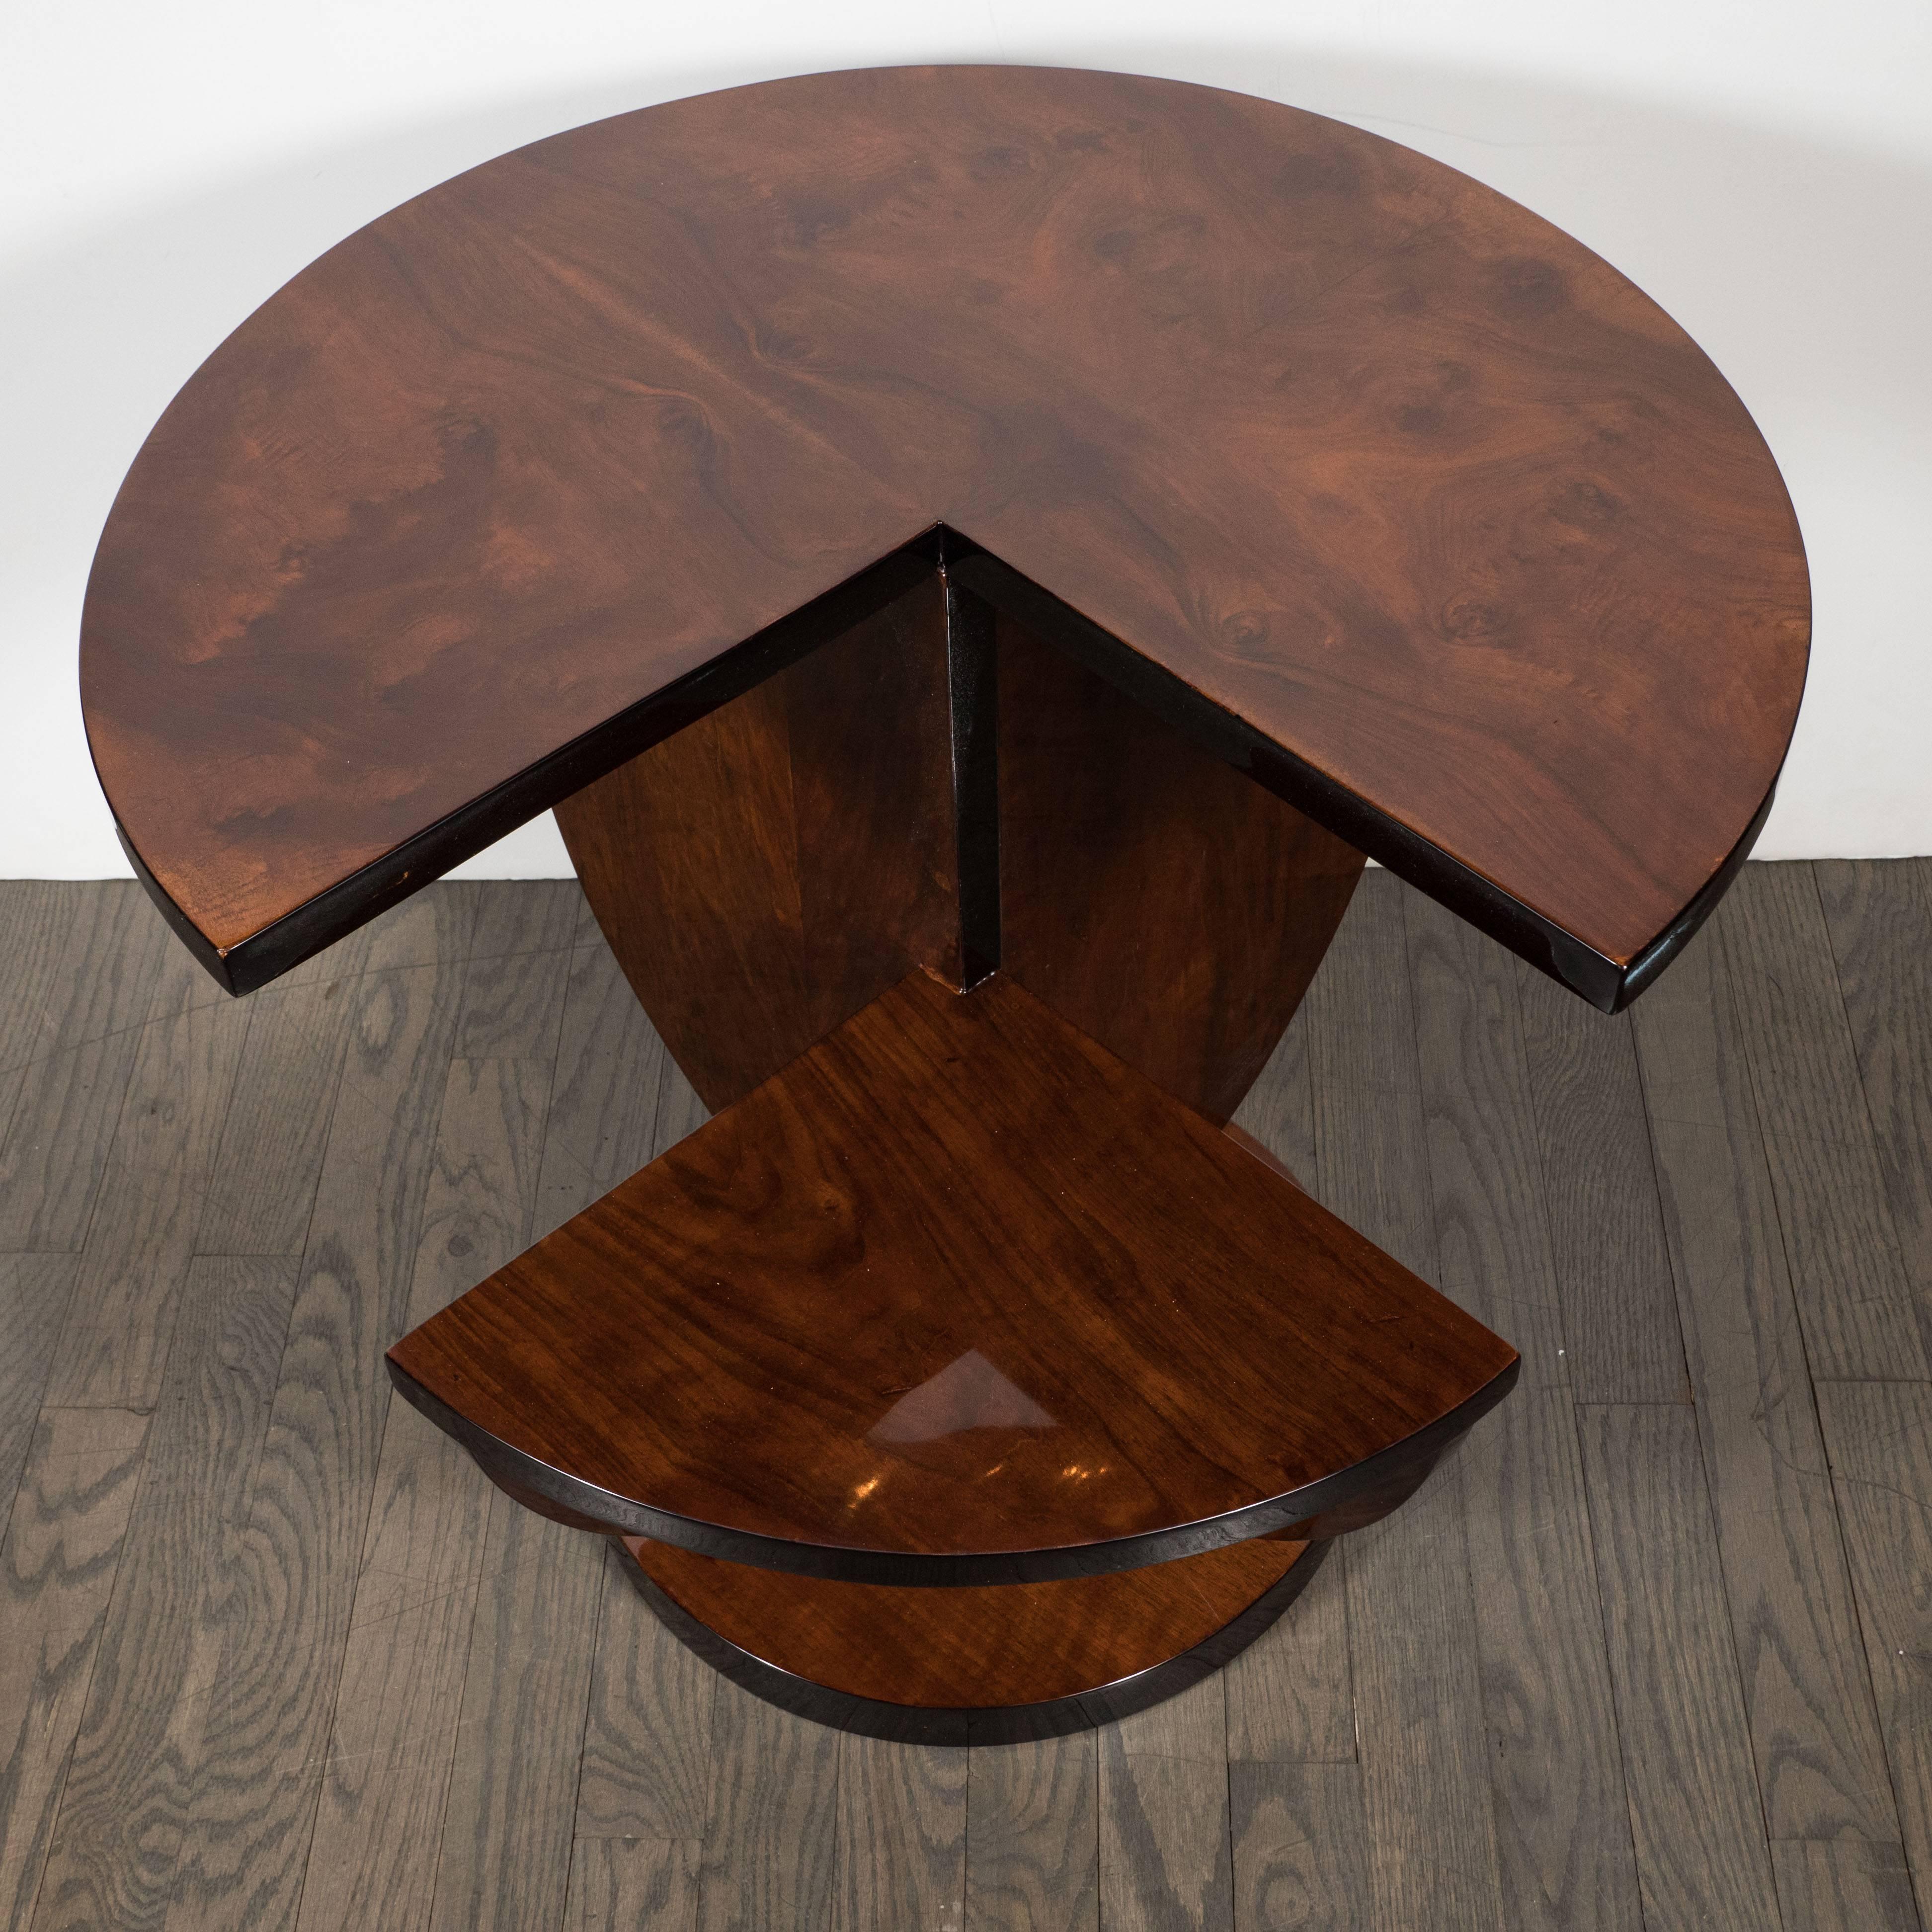 French Art Deco Cubist Side Table in Bookmatched Burled Walnut and Black Lacquer 1